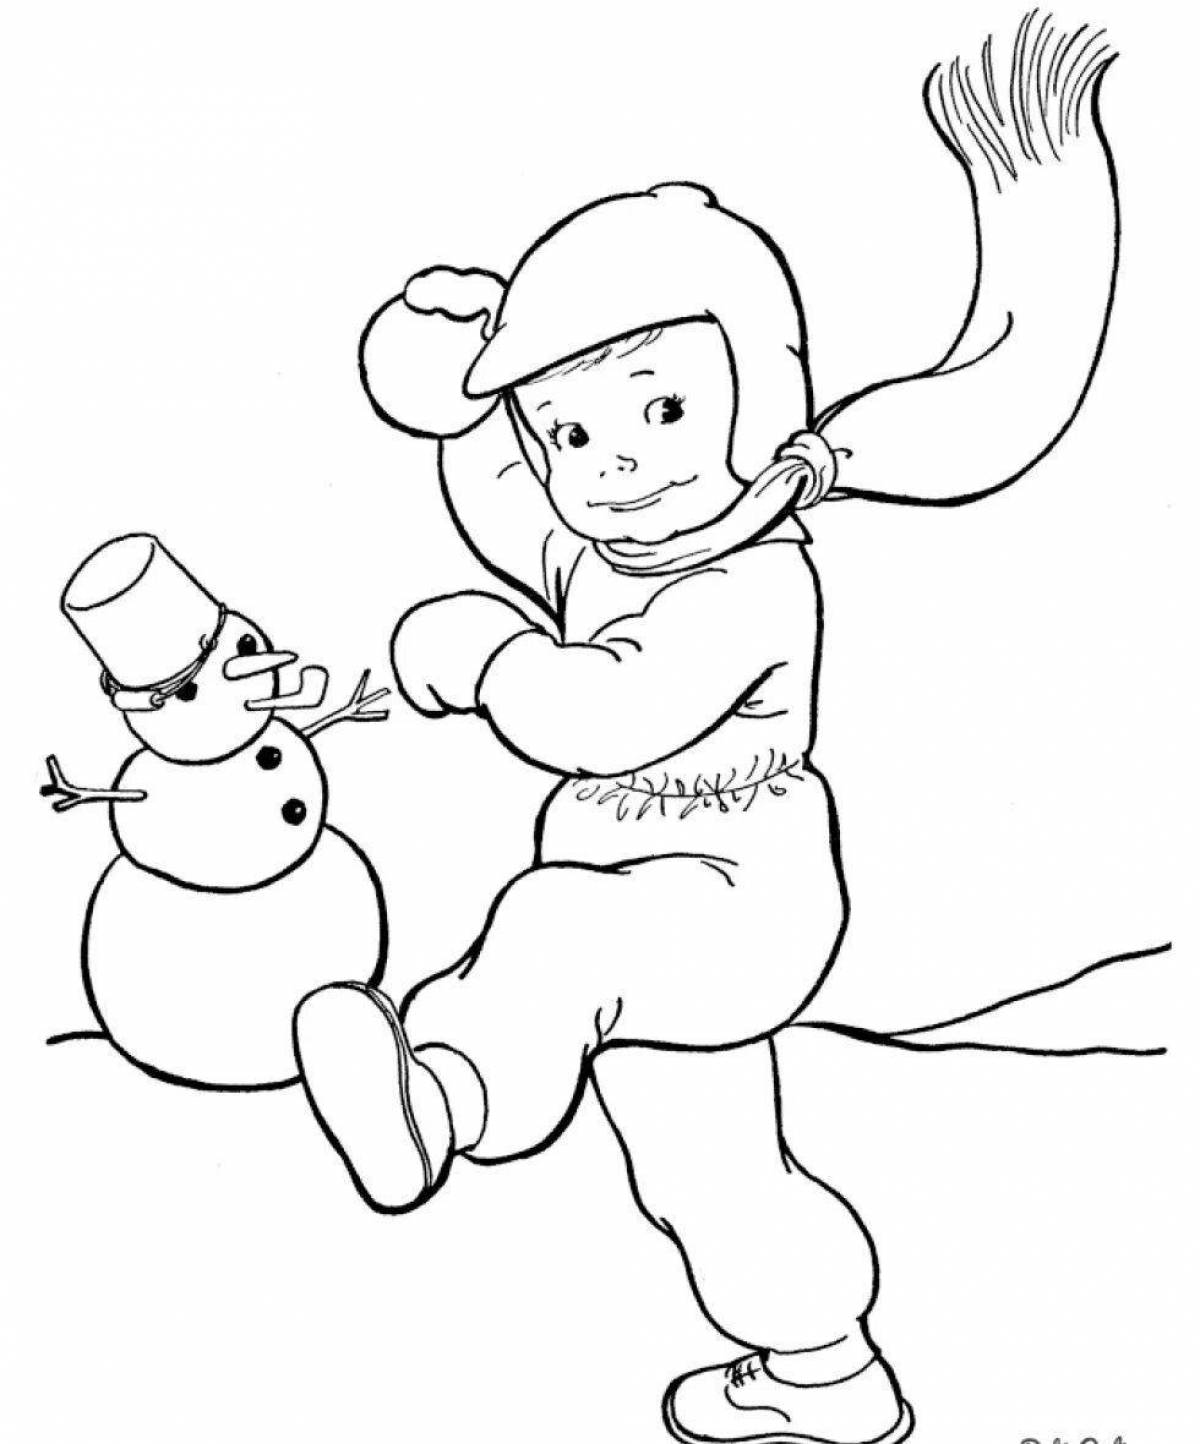 Sweet winter coloring book for 3-4 year olds